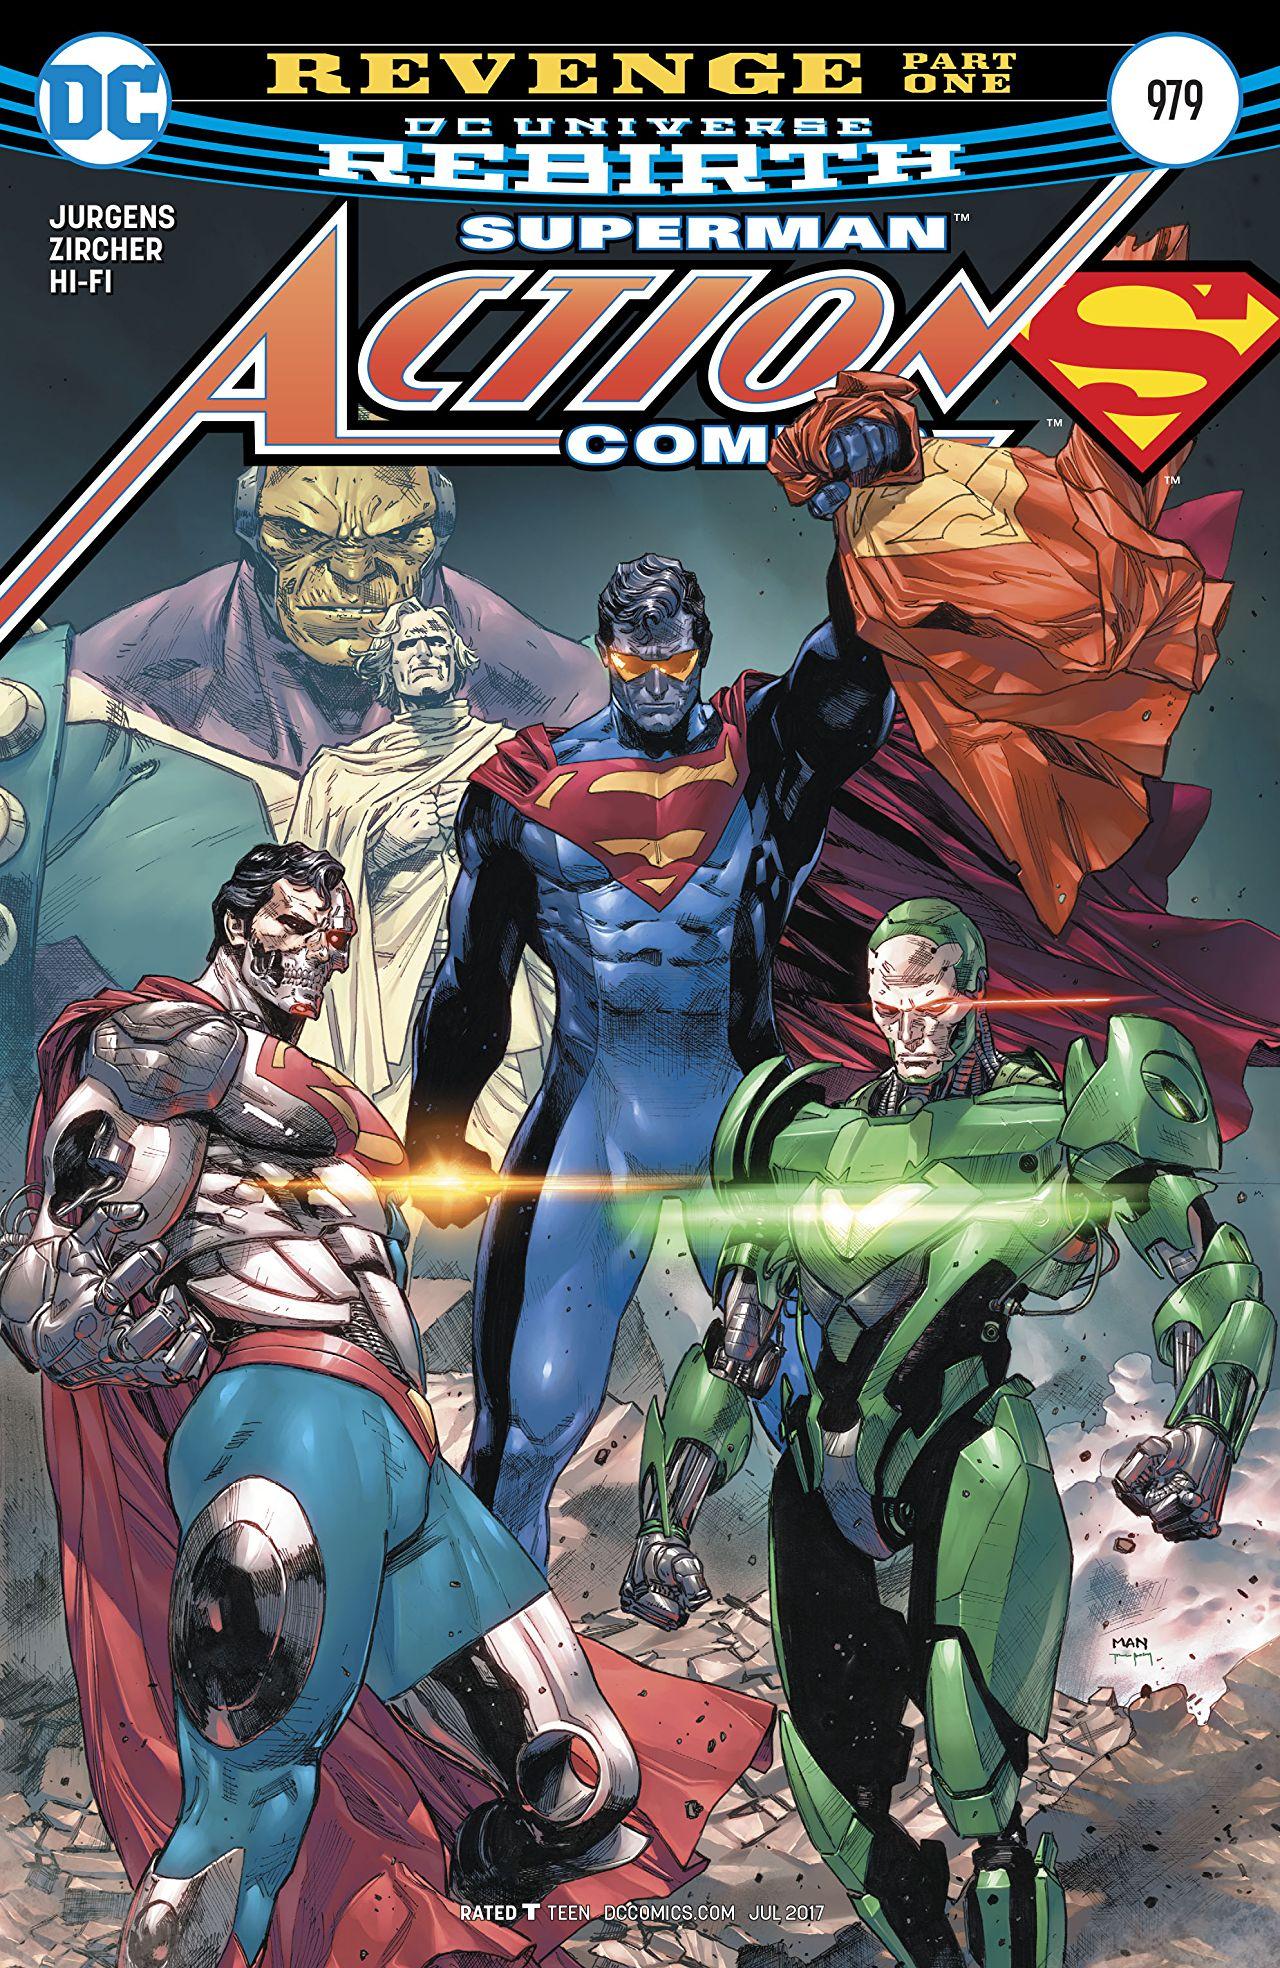 DC on Twitter: "Mongul kills Supes in the of ACTION COMICS #979. Okay, that's clickbait, but don't you want see it now? https://t.co/AR46dIexI3 https://t.co/Zwz44Hddnw"